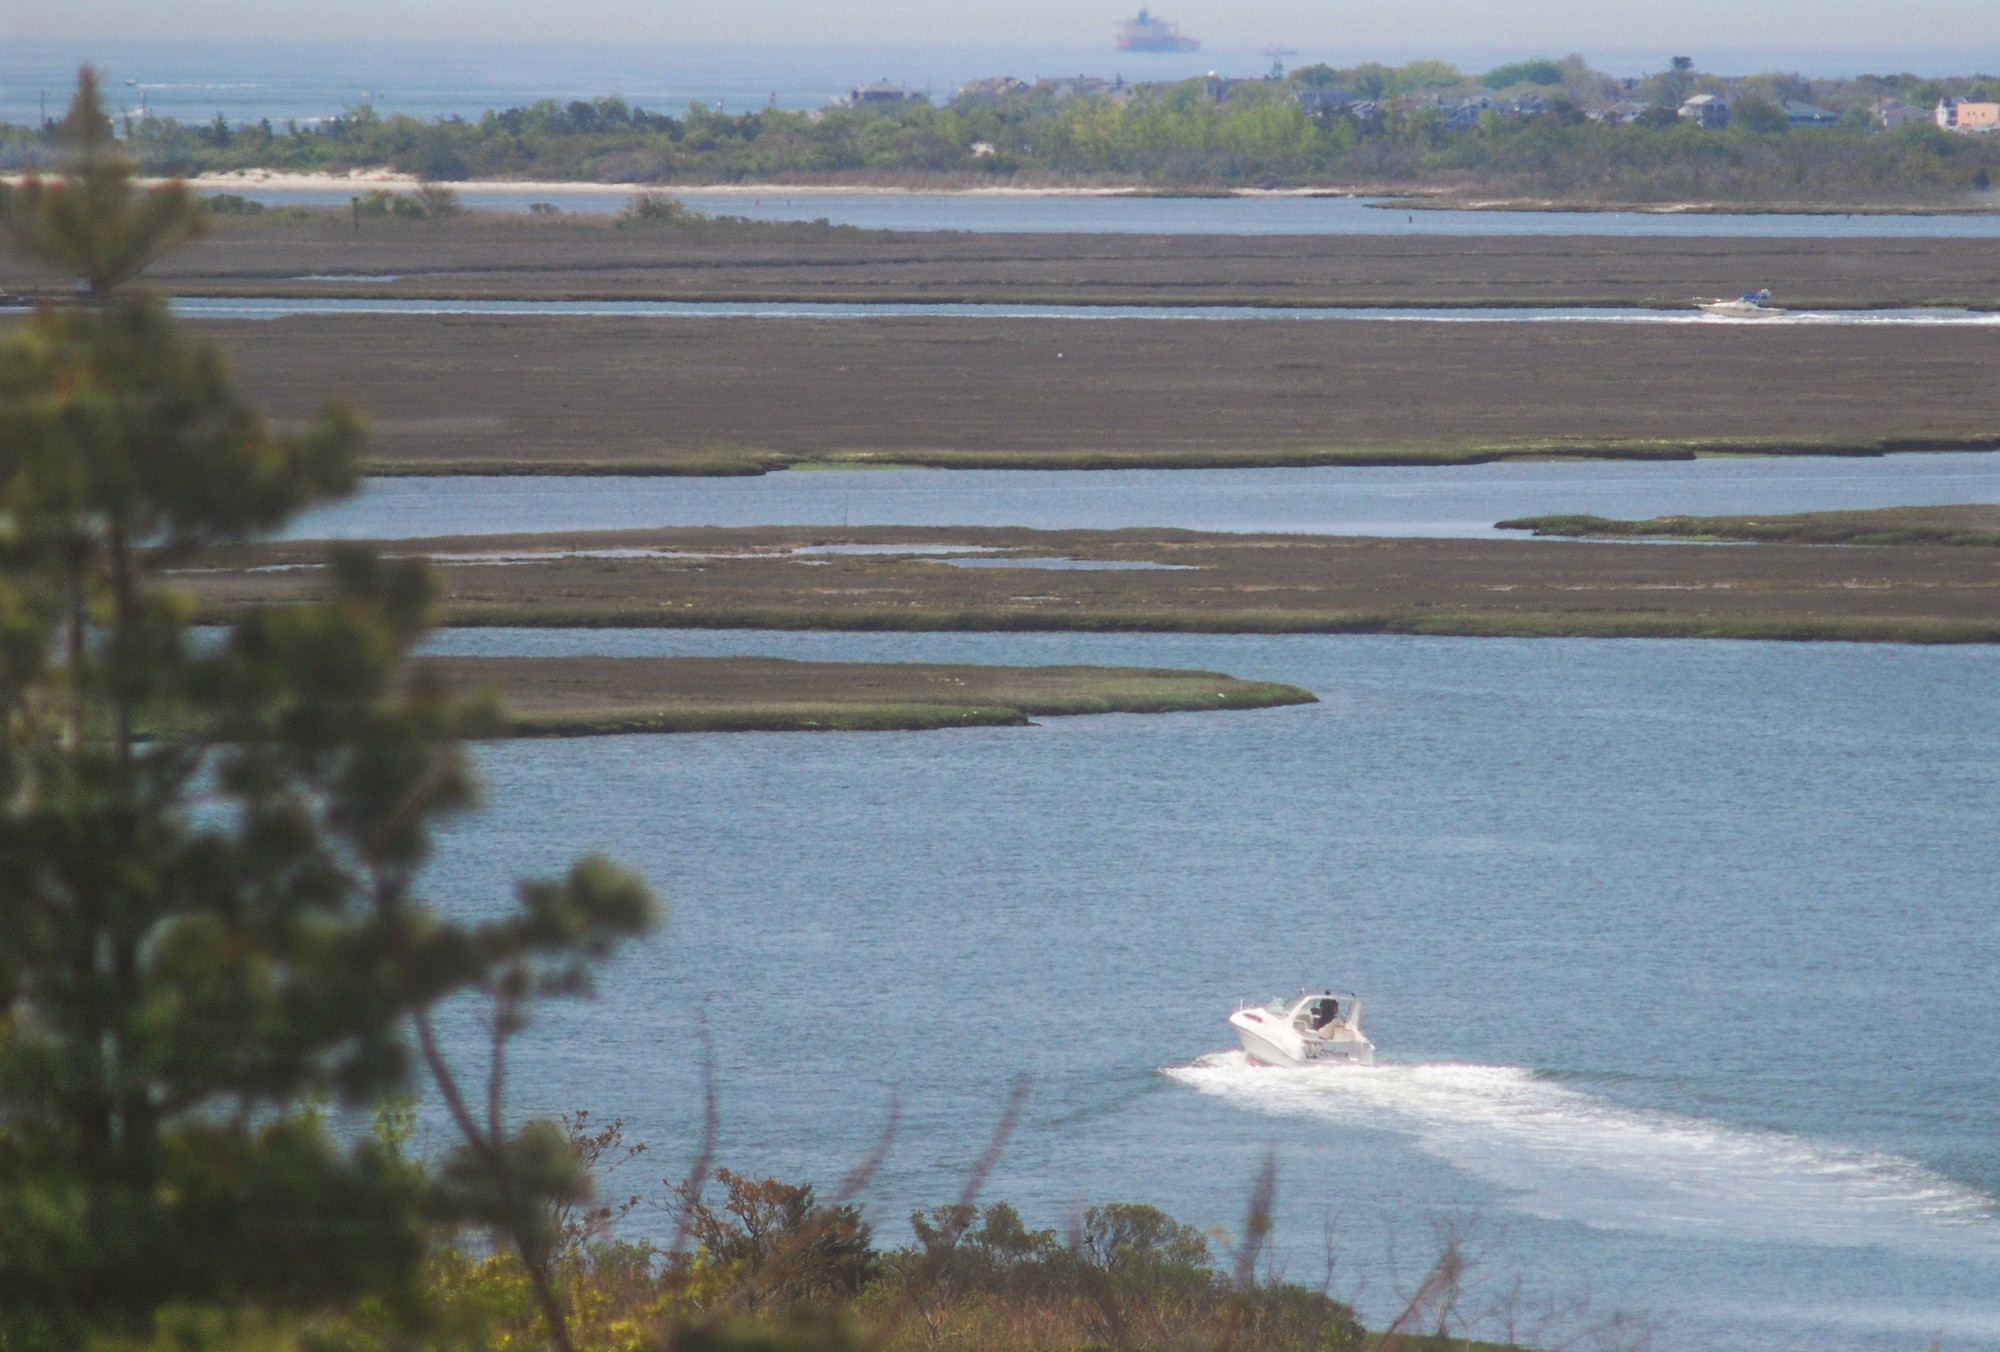 Nassau County has sent treated sewage into Reynolds Channel and the Western Bays since the late 1940s. A new county plan to divert the effluent to an ocean outfall pipe would end the practice, which would improve water quality in the bays, environmental experts say. Above, a view of the bays from the Town of Hempstead’s Norman J. Levy Park and Preserve in Merrick. Photo by Scott Brinton/Herald